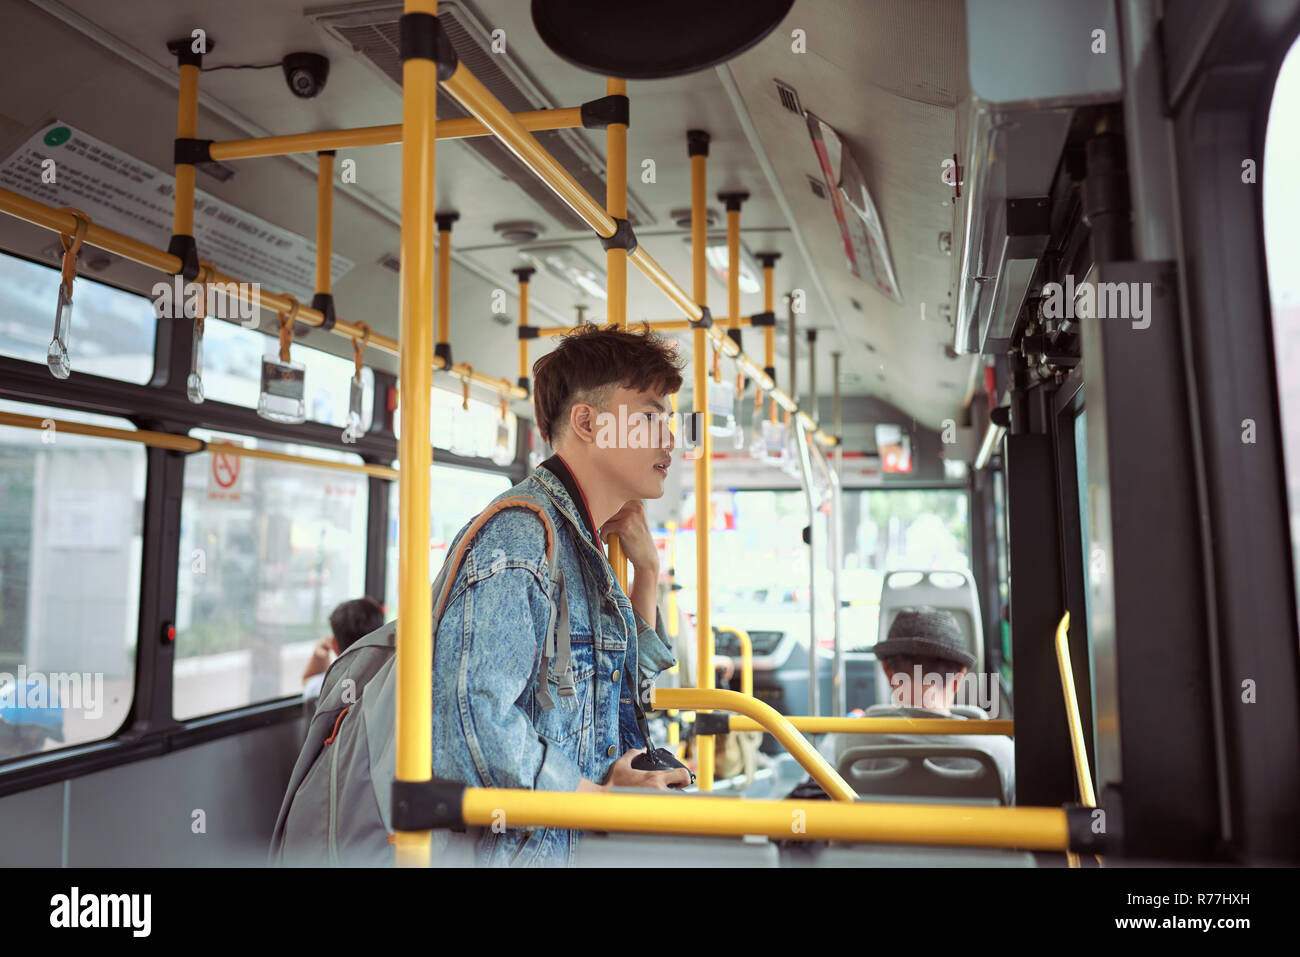 People, lifestyle, travel and public transport. Asian man standing inside city bus. Stock Photo